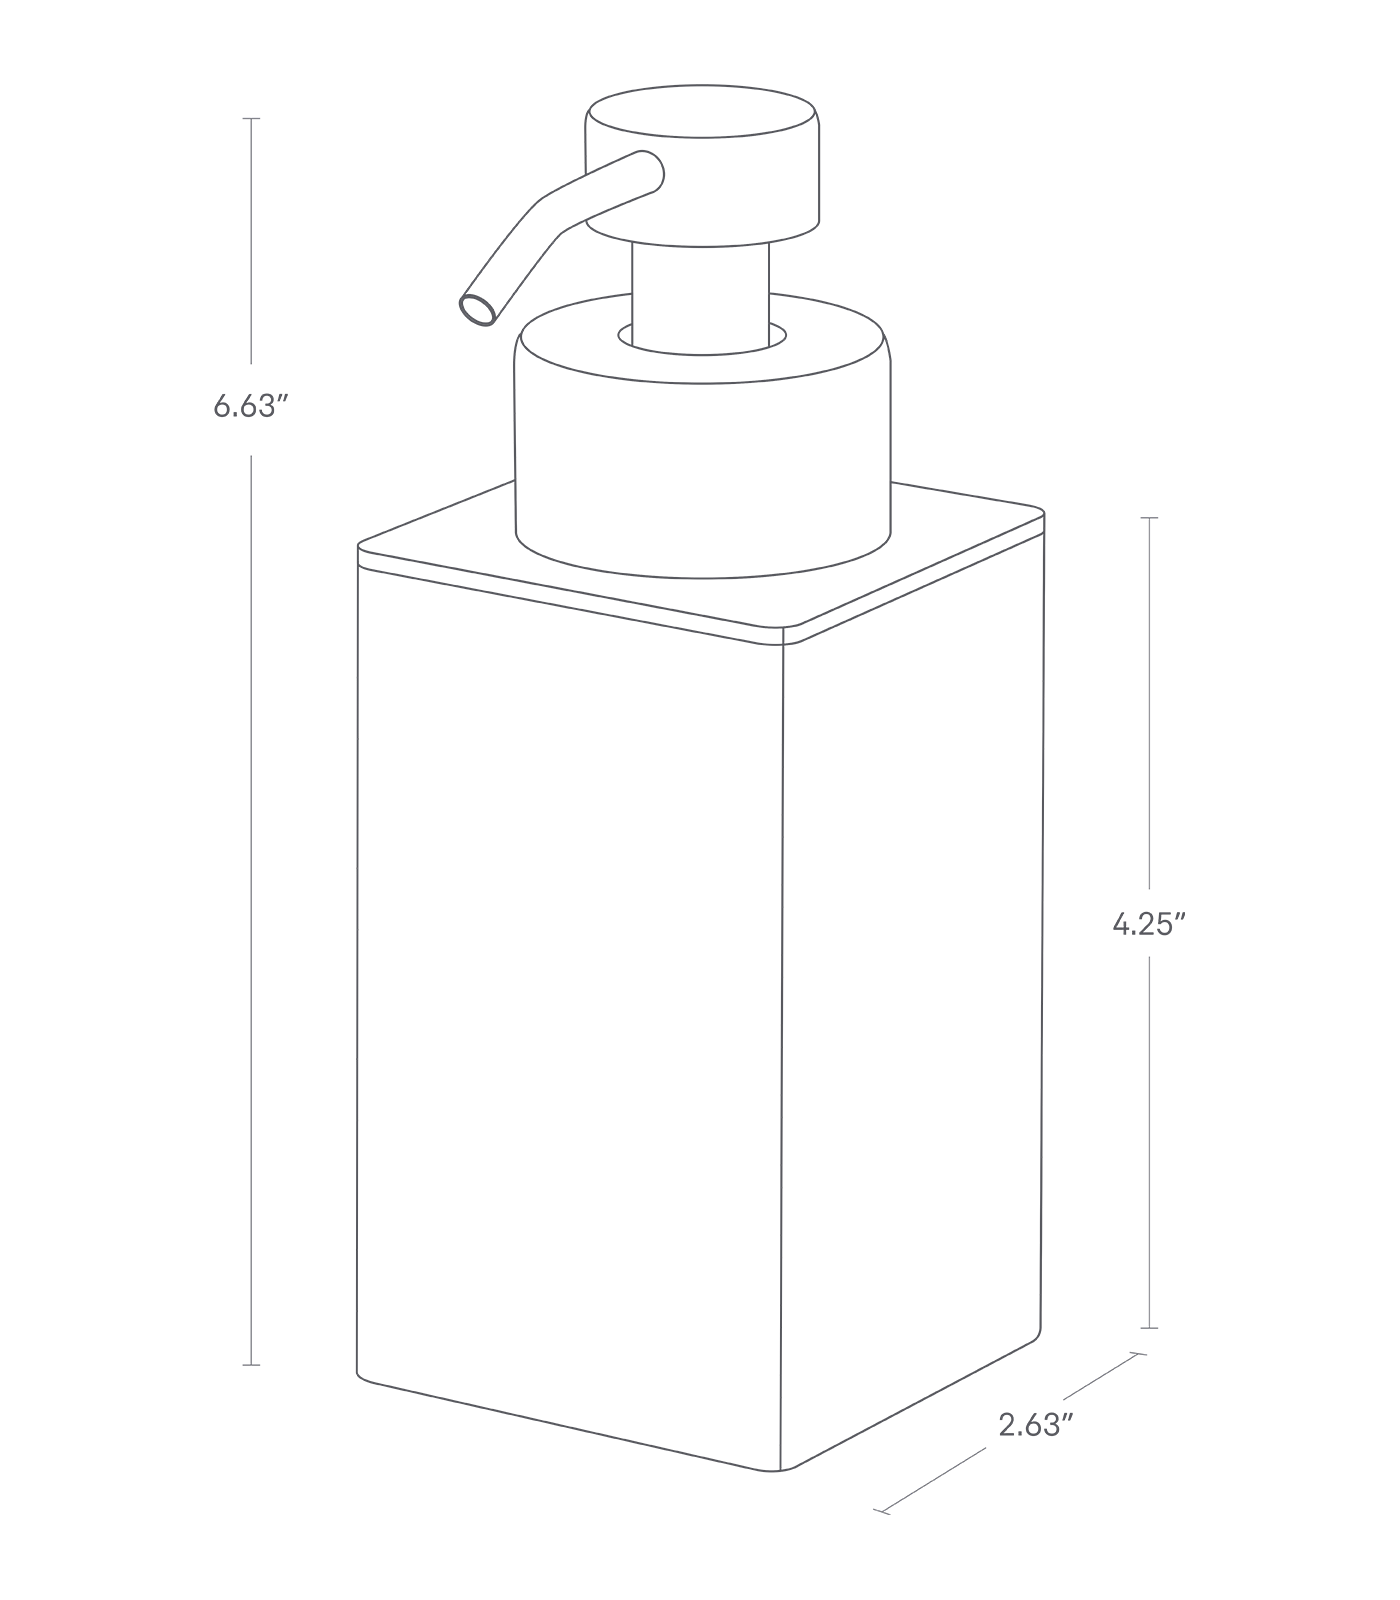 Dimension image for Foaming Soap Dispenseron a white background showinga length of 2.63